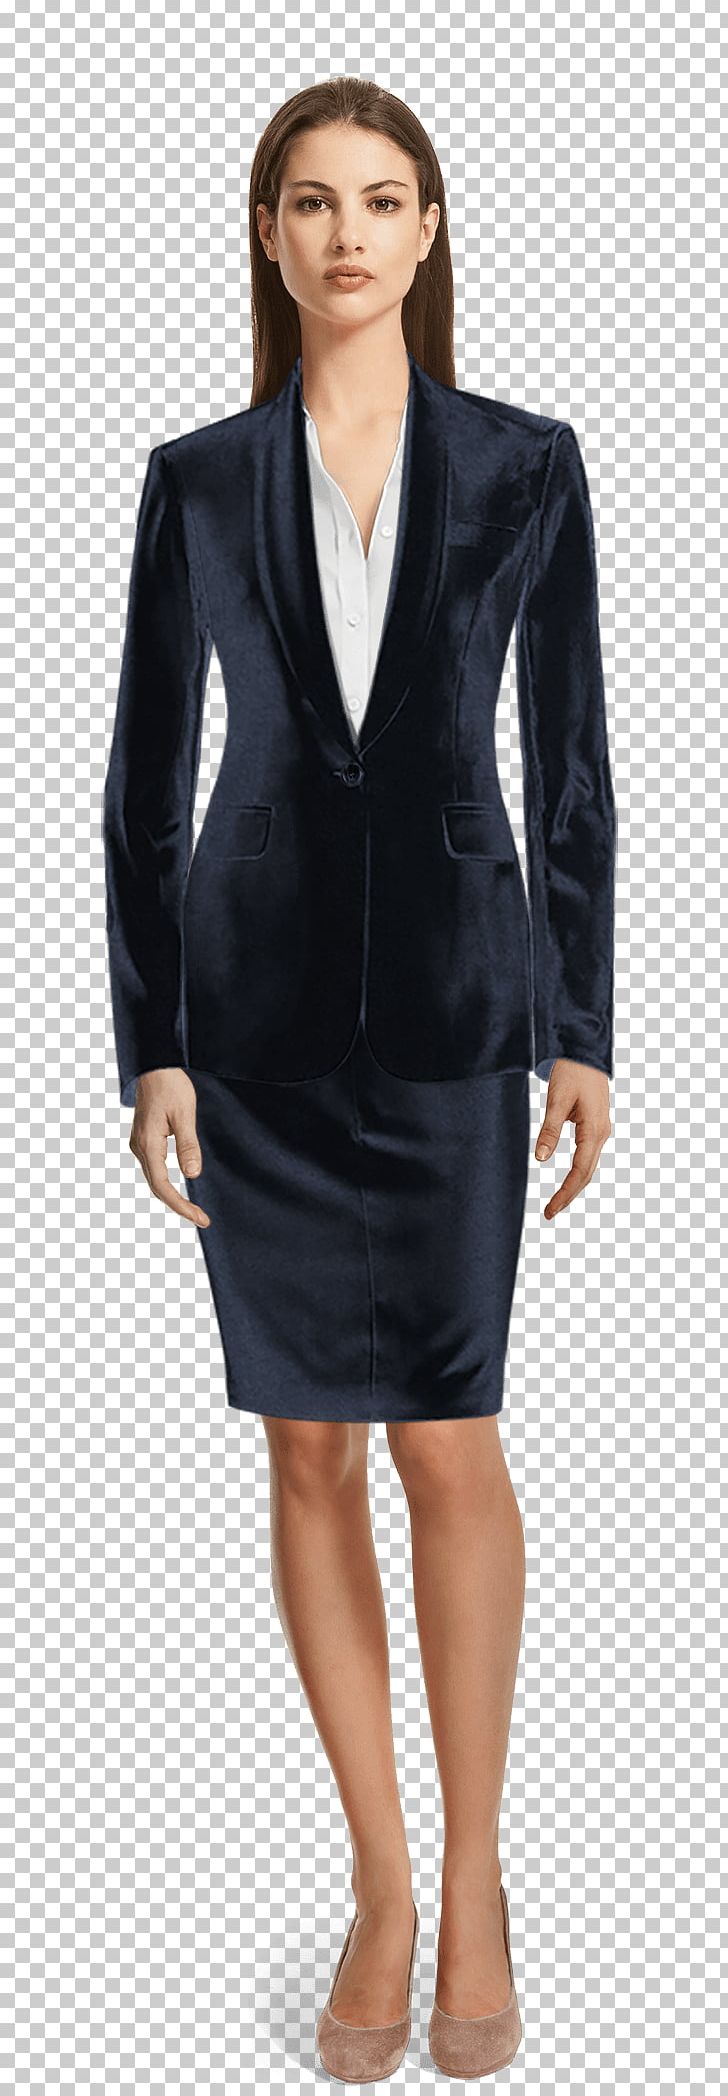 Tuxedo Suit Jakkupuku Tailor Clothing PNG, Clipart, Blazer, Businessperson, Clothing, Doublebreasted, Dress Free PNG Download